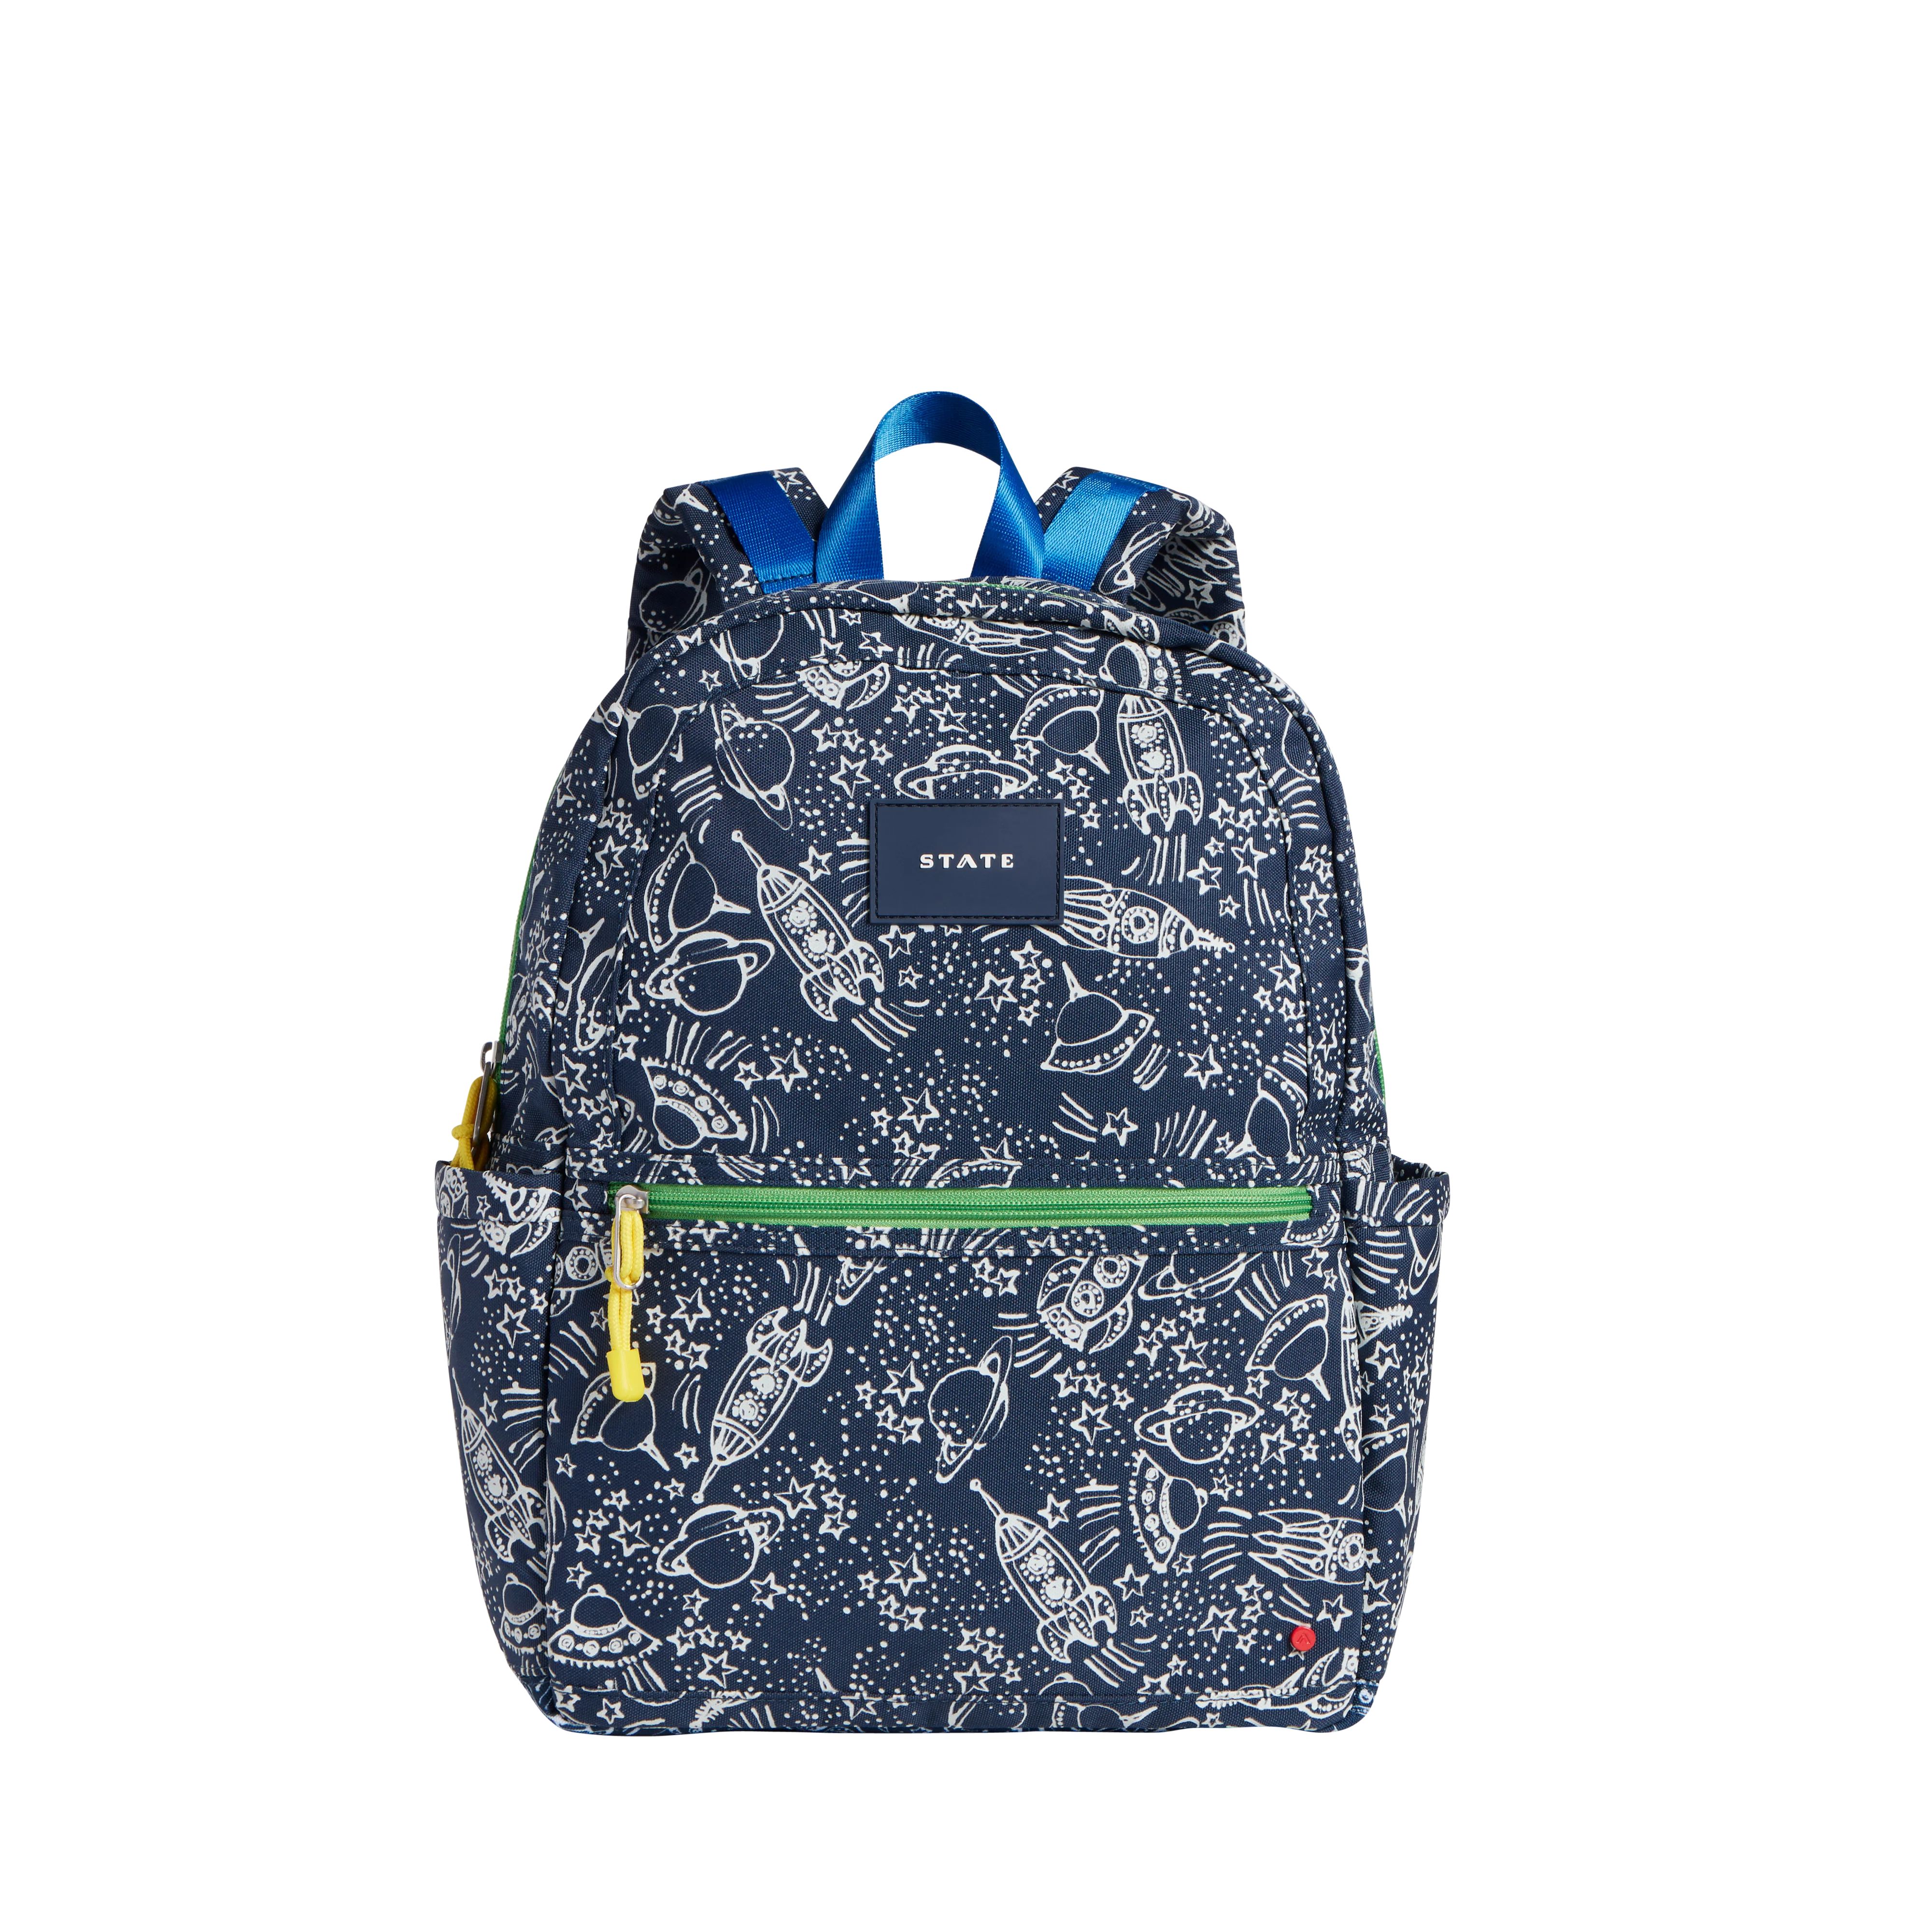 STATE Bags | Kane Kids Backpack Poly Canvas Space Glow in the Dark | STATE Bags